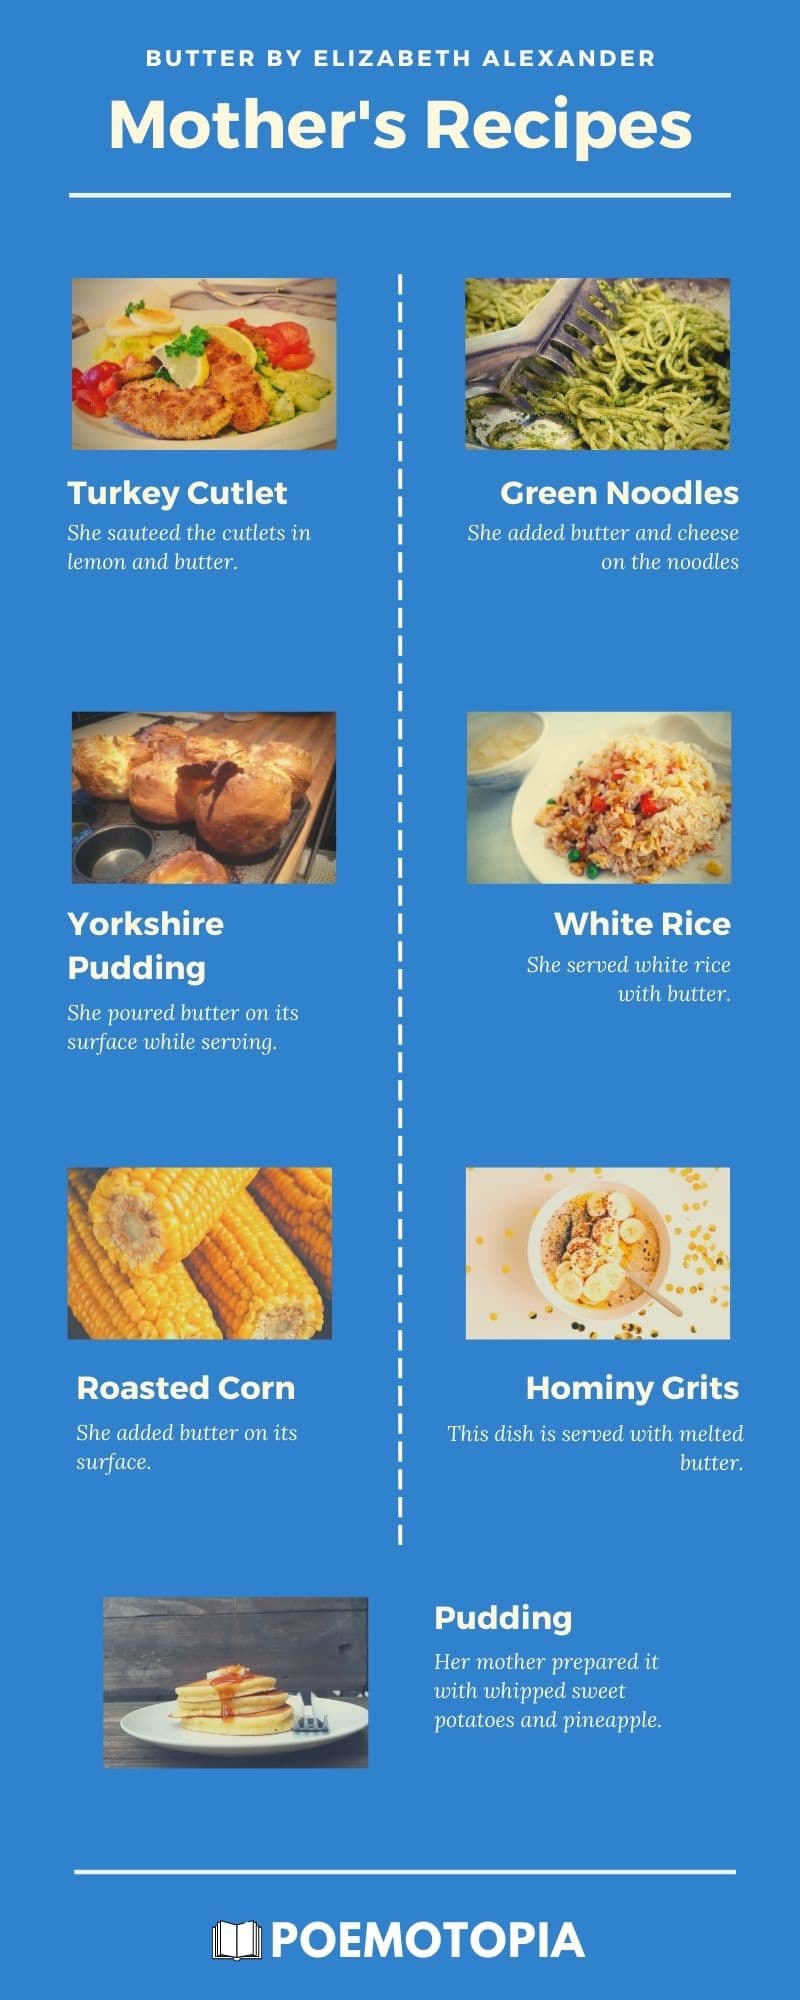 An Infographic of Mother's Recipes in Butter by Elizabeth Alexander